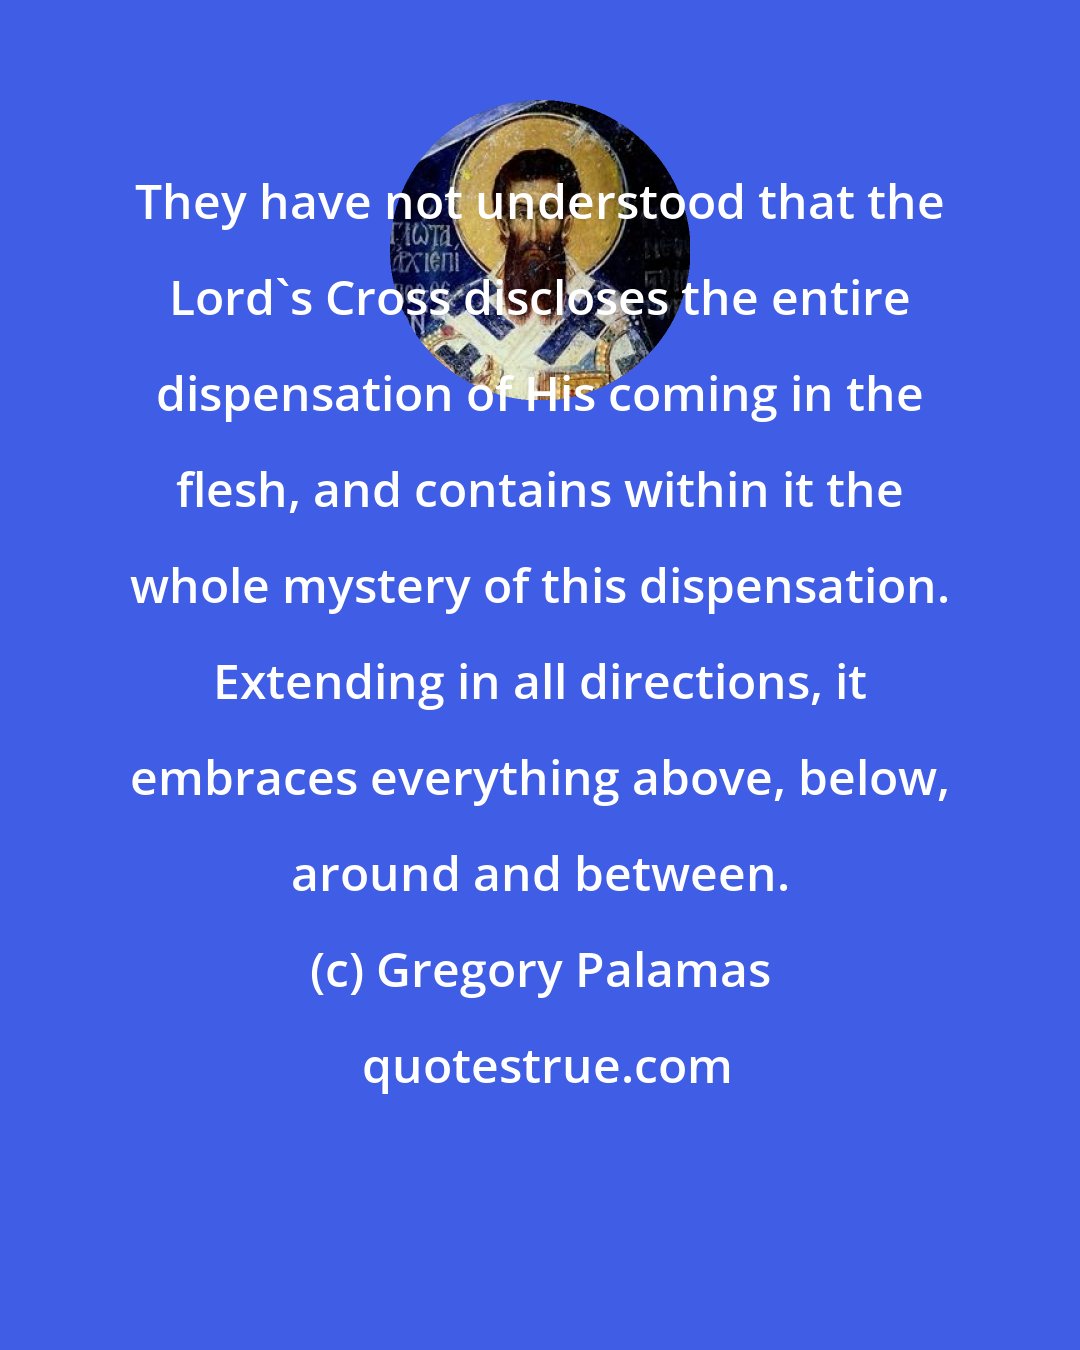 Gregory Palamas: They have not understood that the Lord's Cross discloses the entire dispensation of His coming in the flesh, and contains within it the whole mystery of this dispensation. Extending in all directions, it embraces everything above, below, around and between.